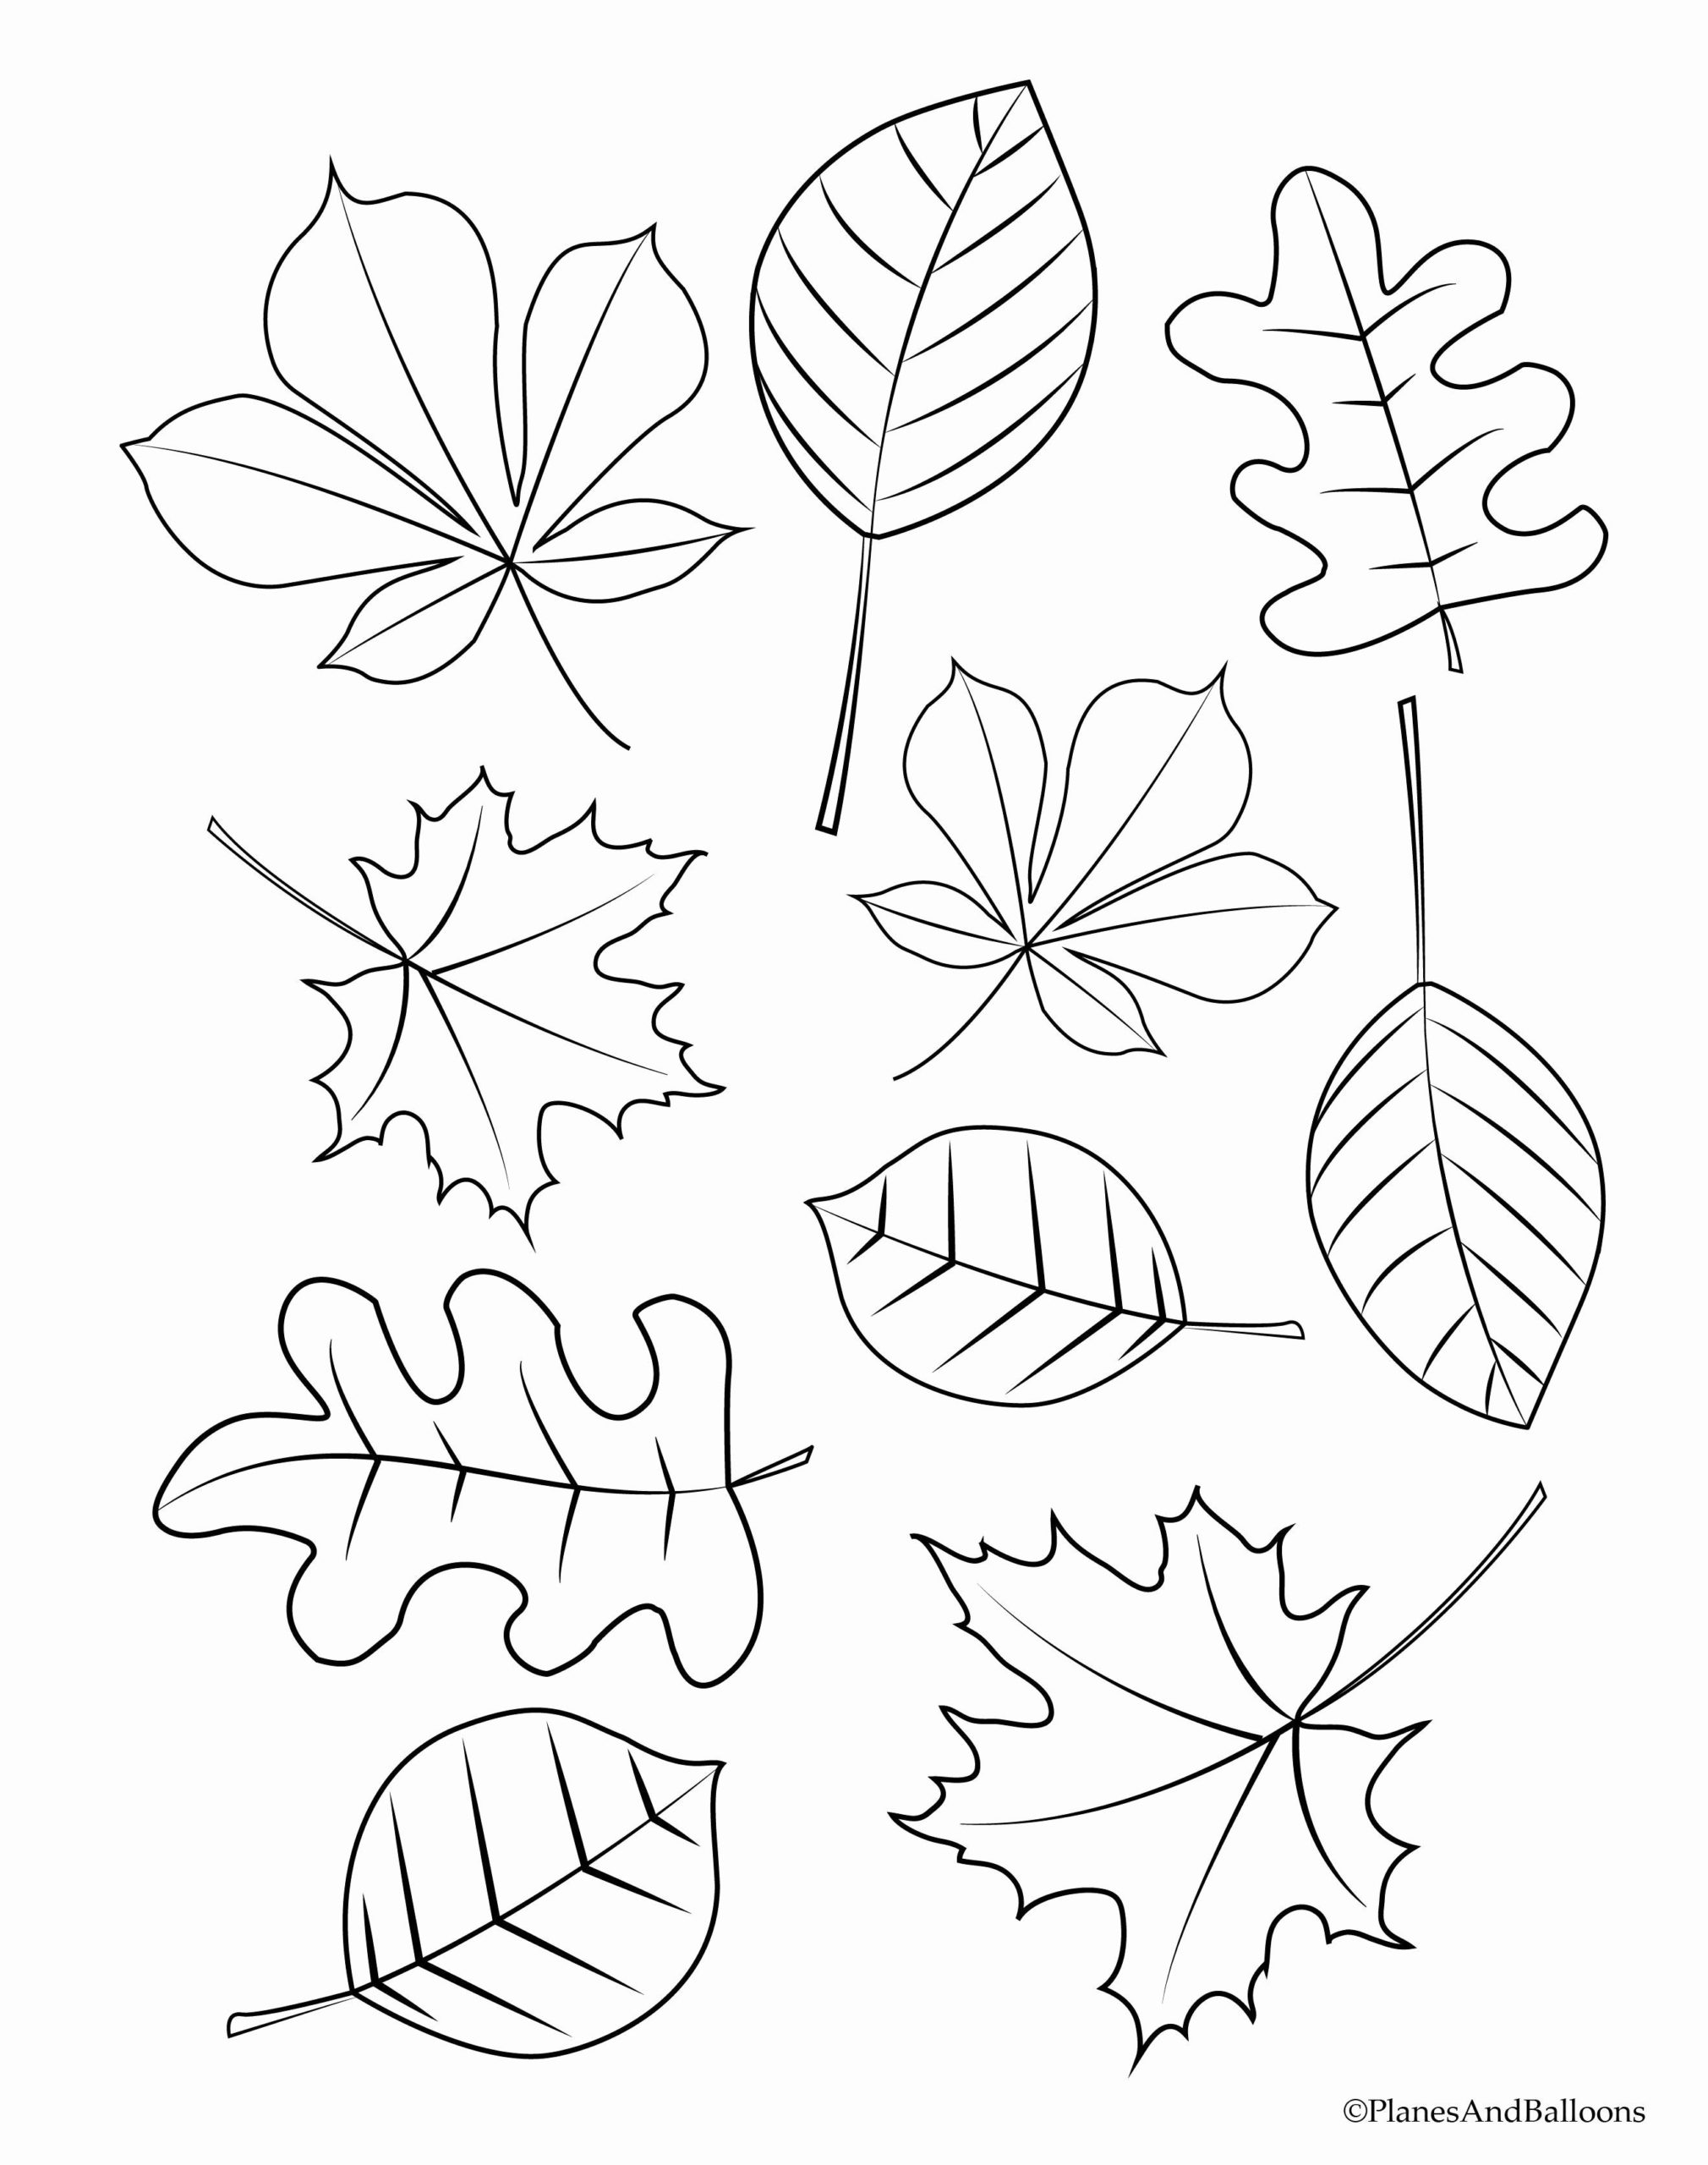 Coloring Pages : Pin On Tree Coloring Leaf Clover Maple Sheet Four ...